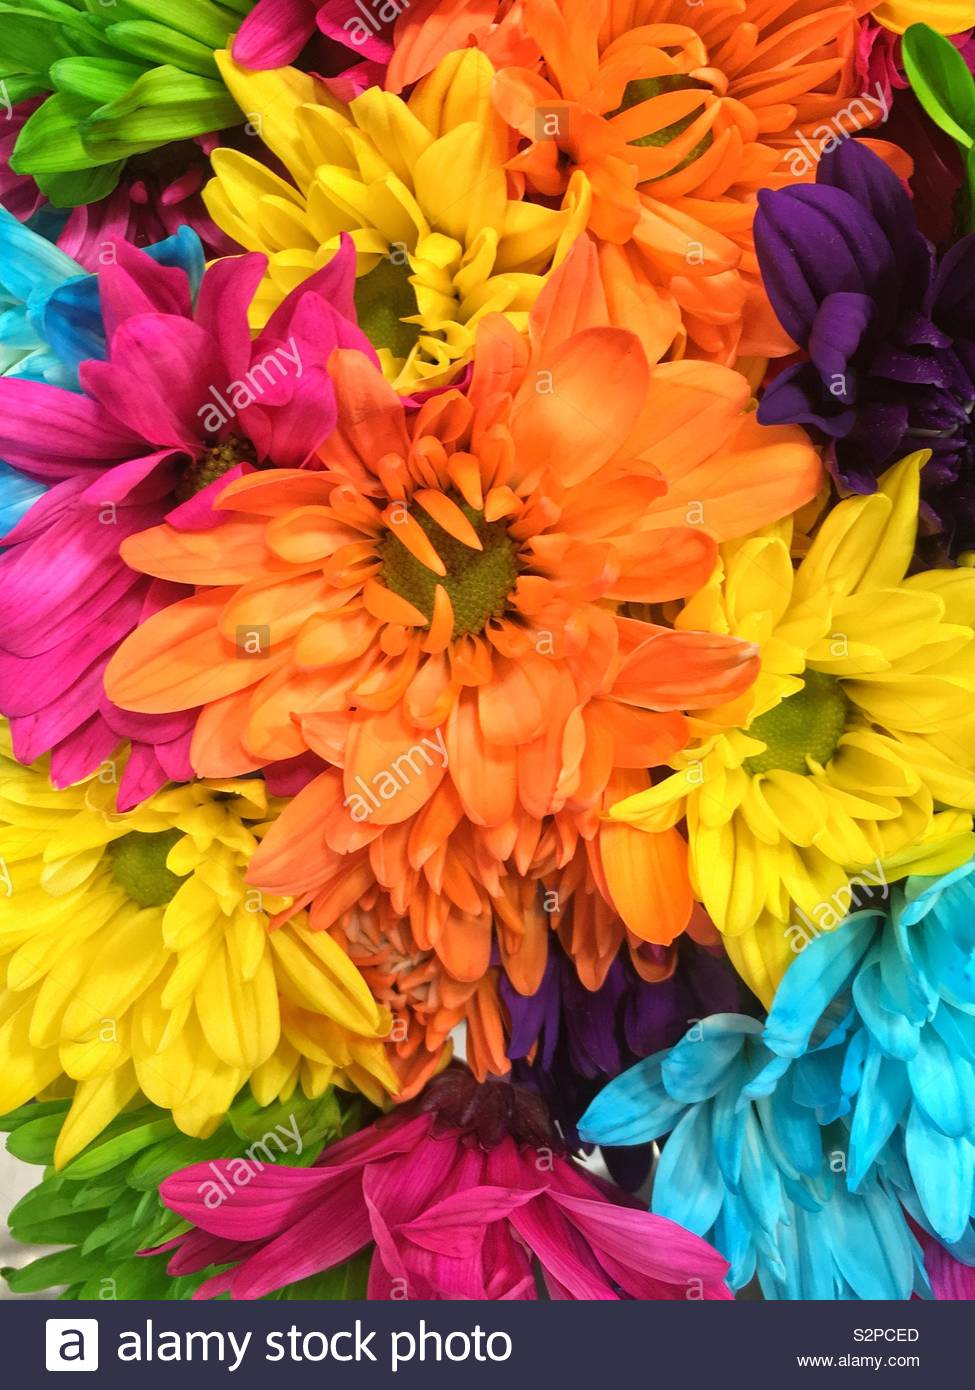 Beautiful bouquet of fresh brightly colored daisies and chrysanthemums in full bloom. Stock Photo